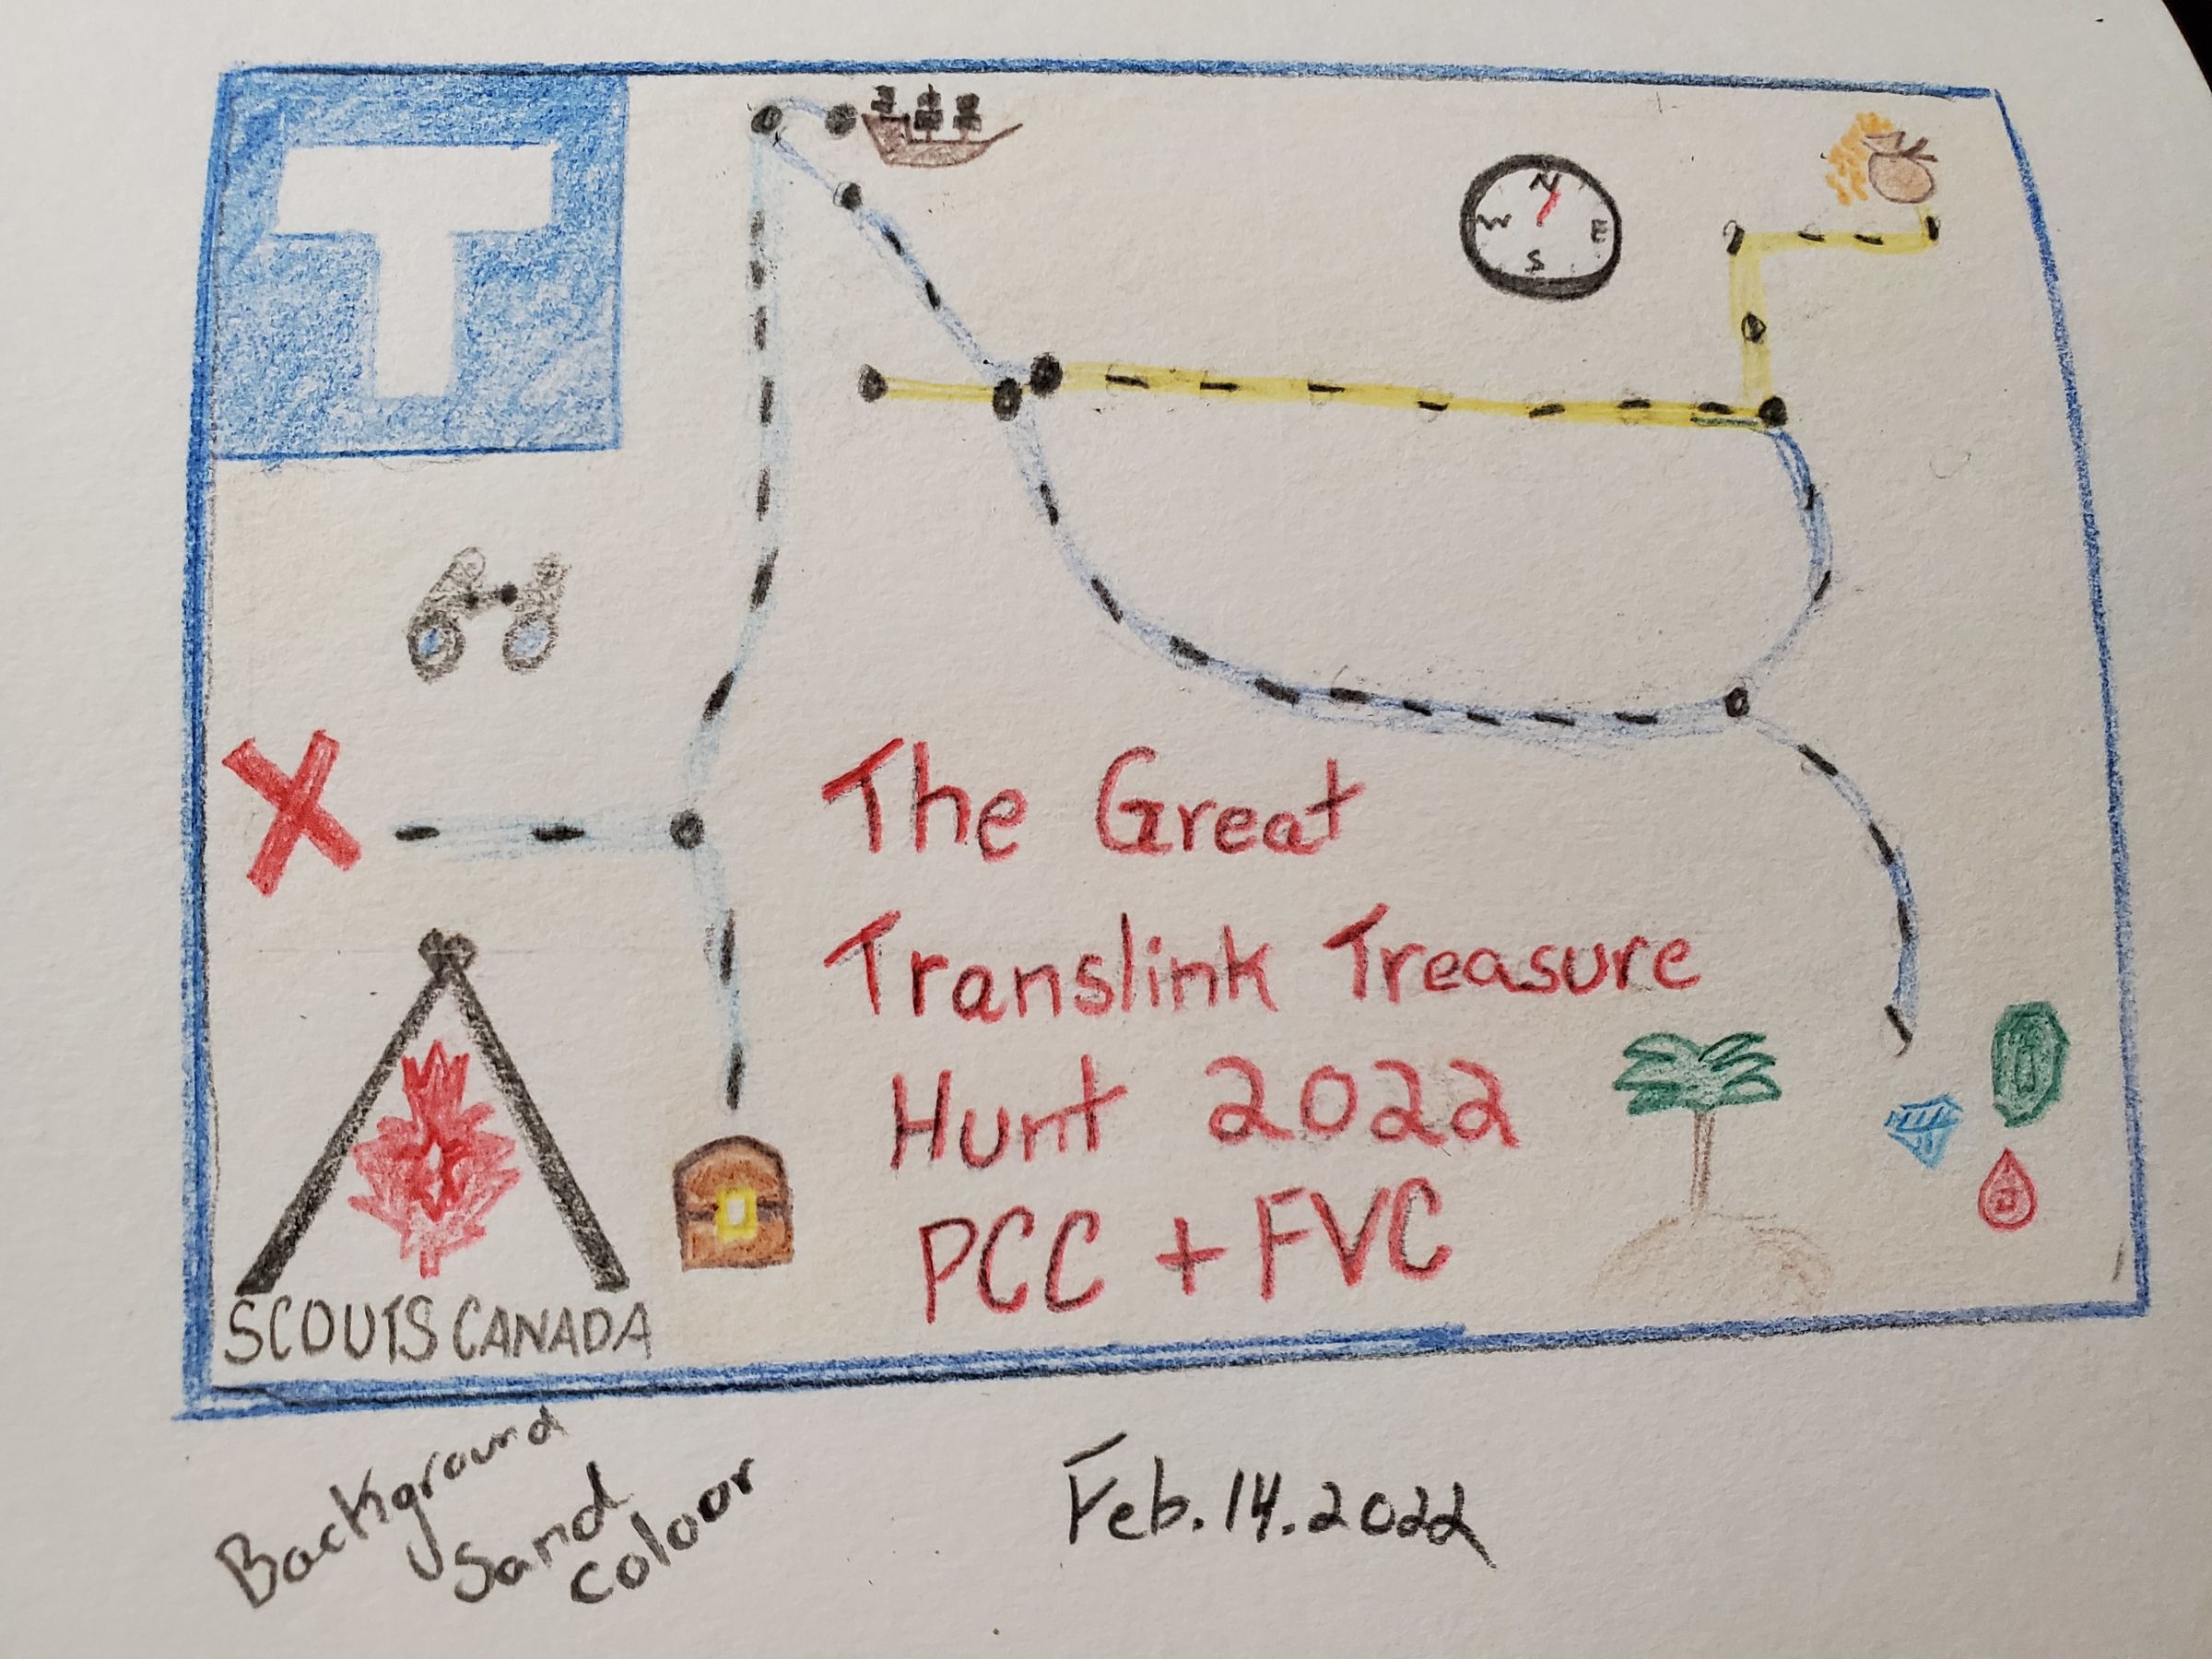 A map of The great TransLink treasure hunt